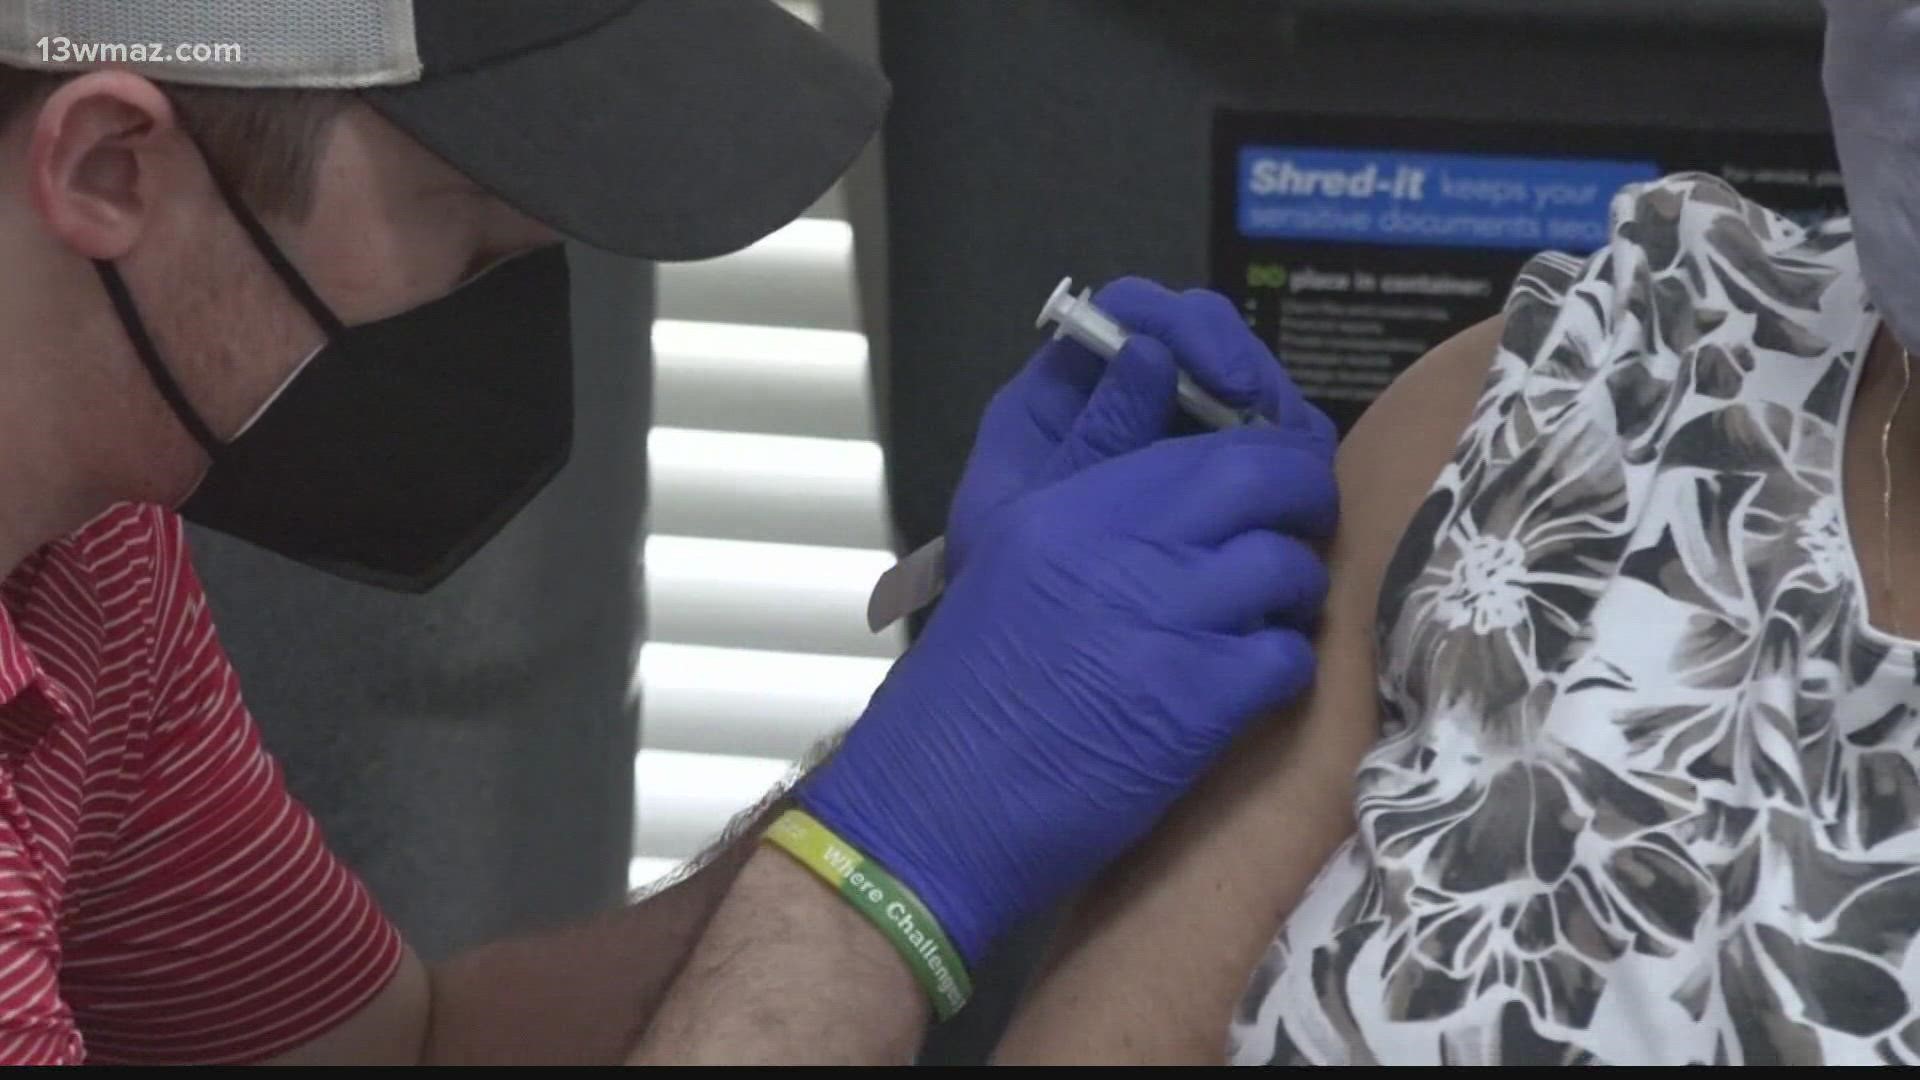 Macon-Bibb County commissioners voted 6-2 to pay full-time county employees $500 and part-time employees $250 who are vaccinated or chose to get vaccinated Tuesday